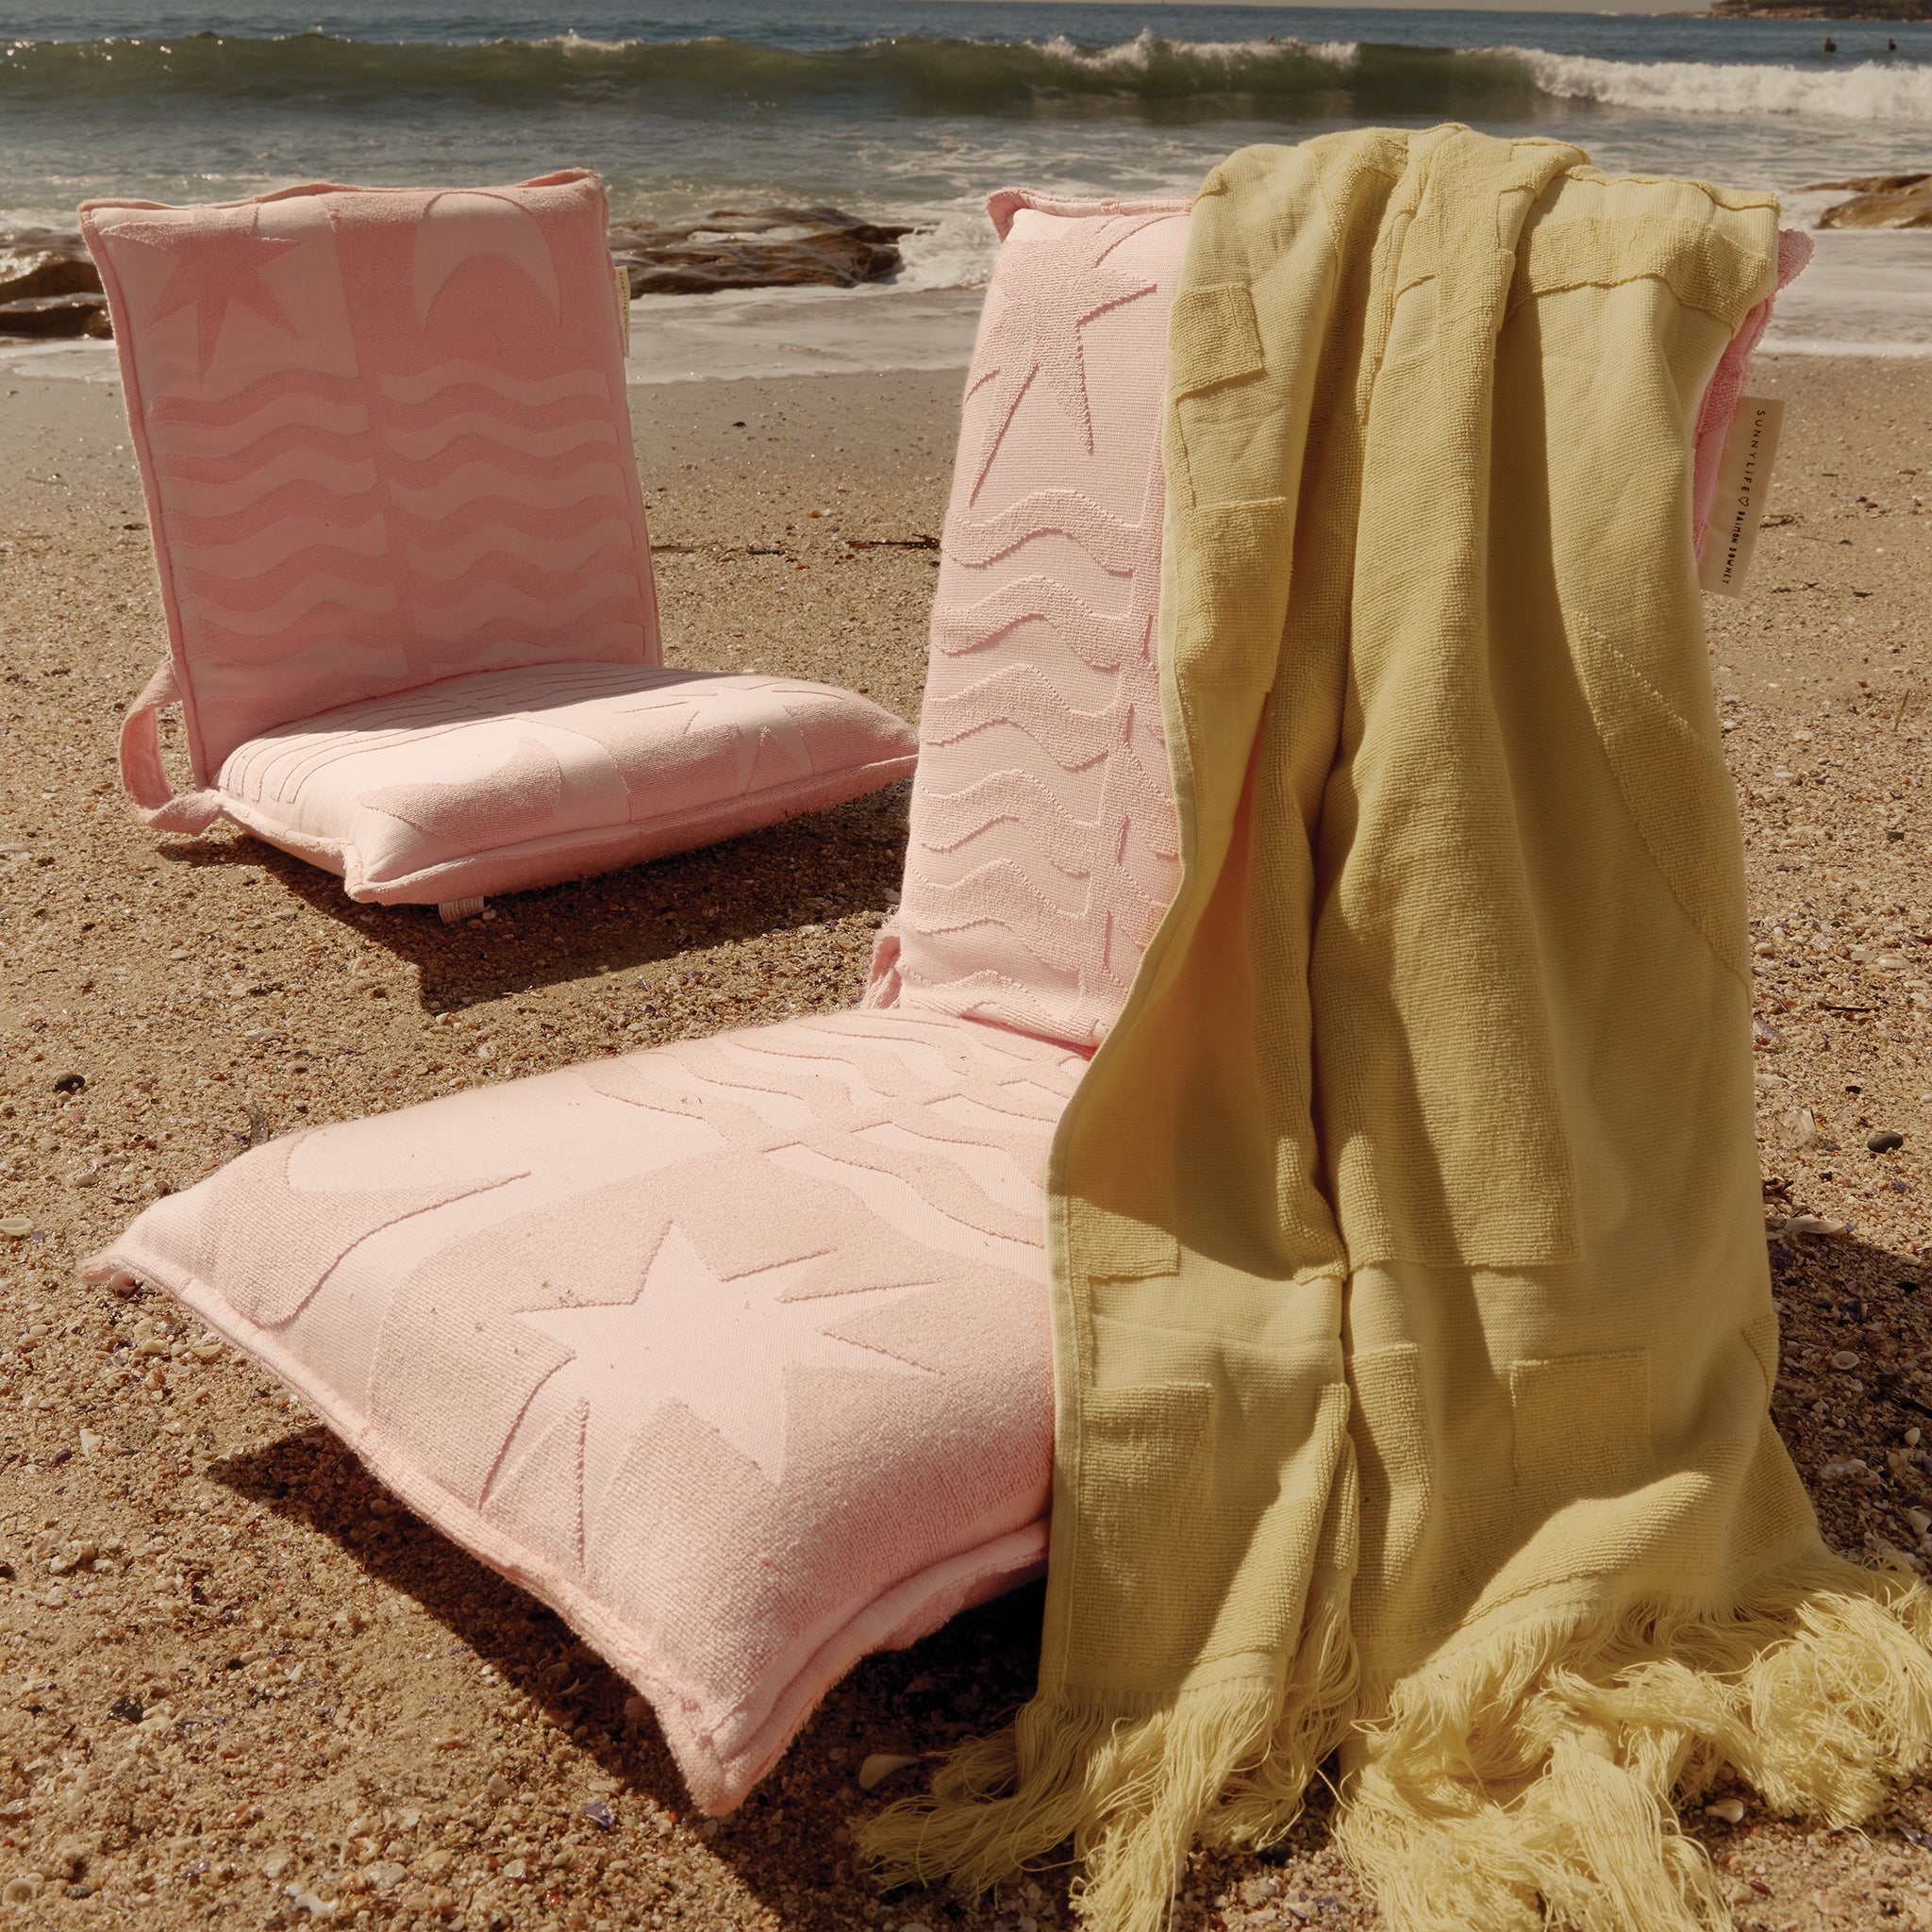 Terry Travel Lounger Chair | Salmon